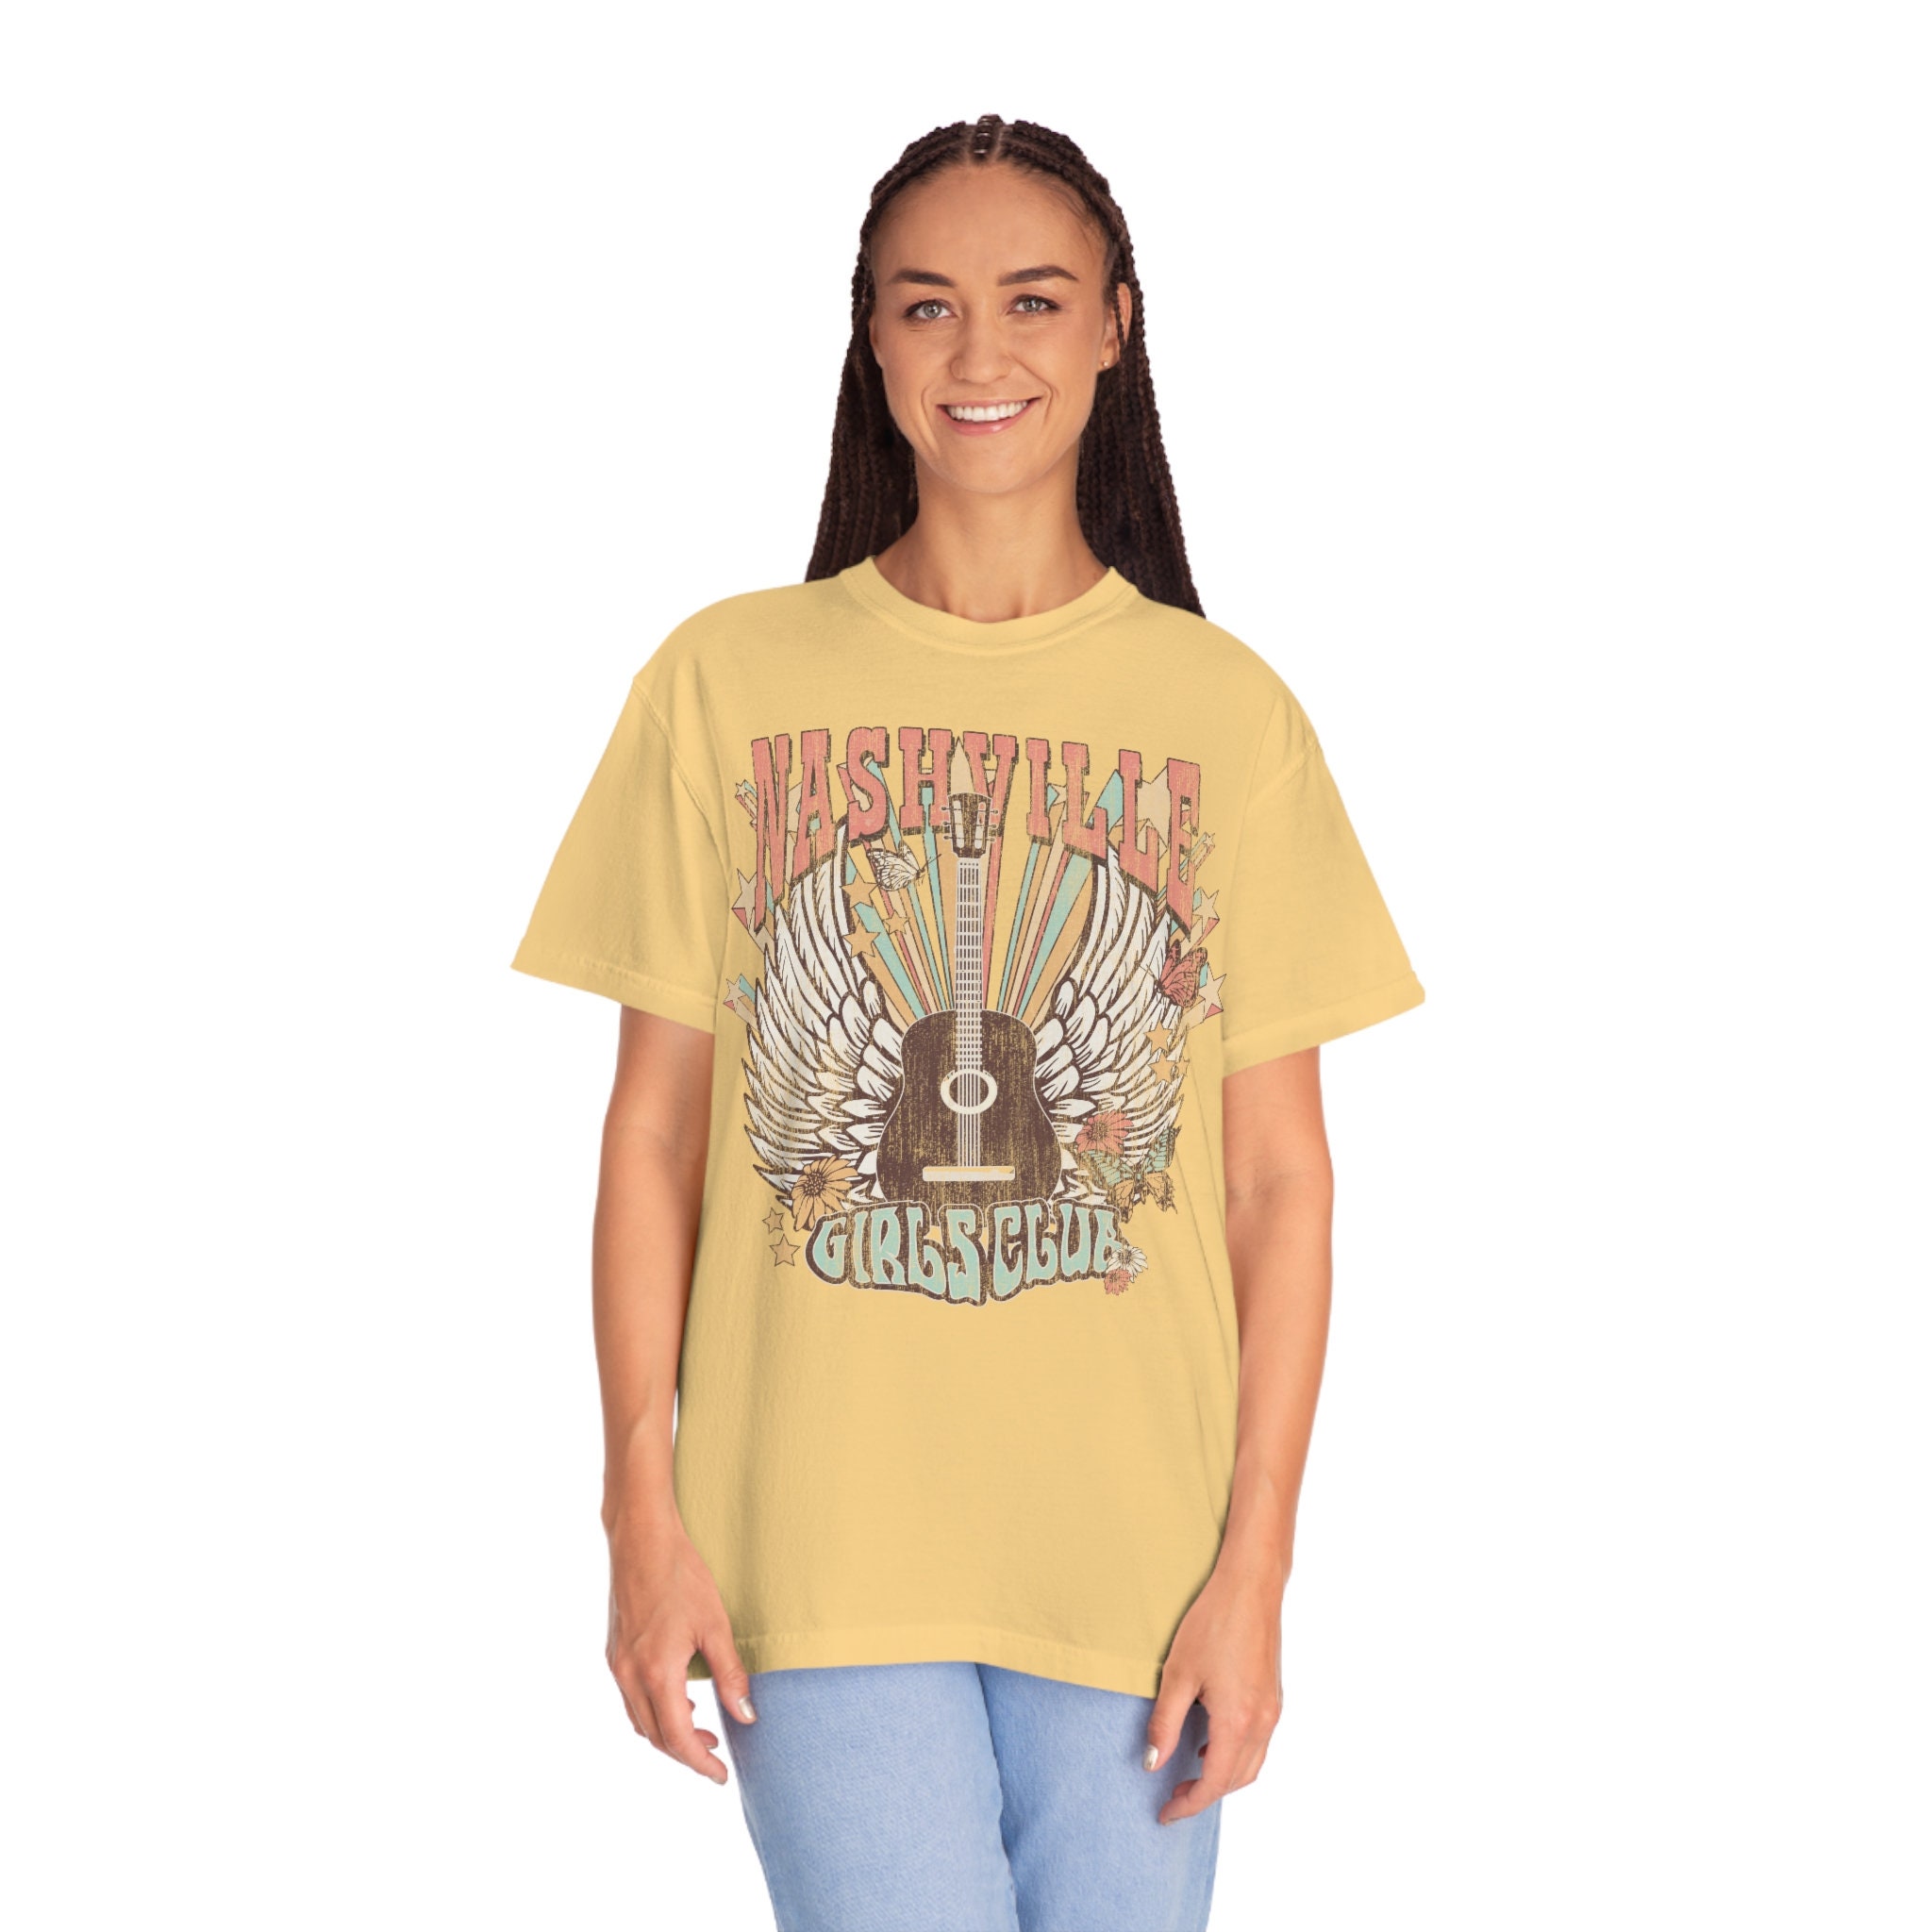 Discover Nashville Shirt, Cowgirl Tee, Western Graphic Tee